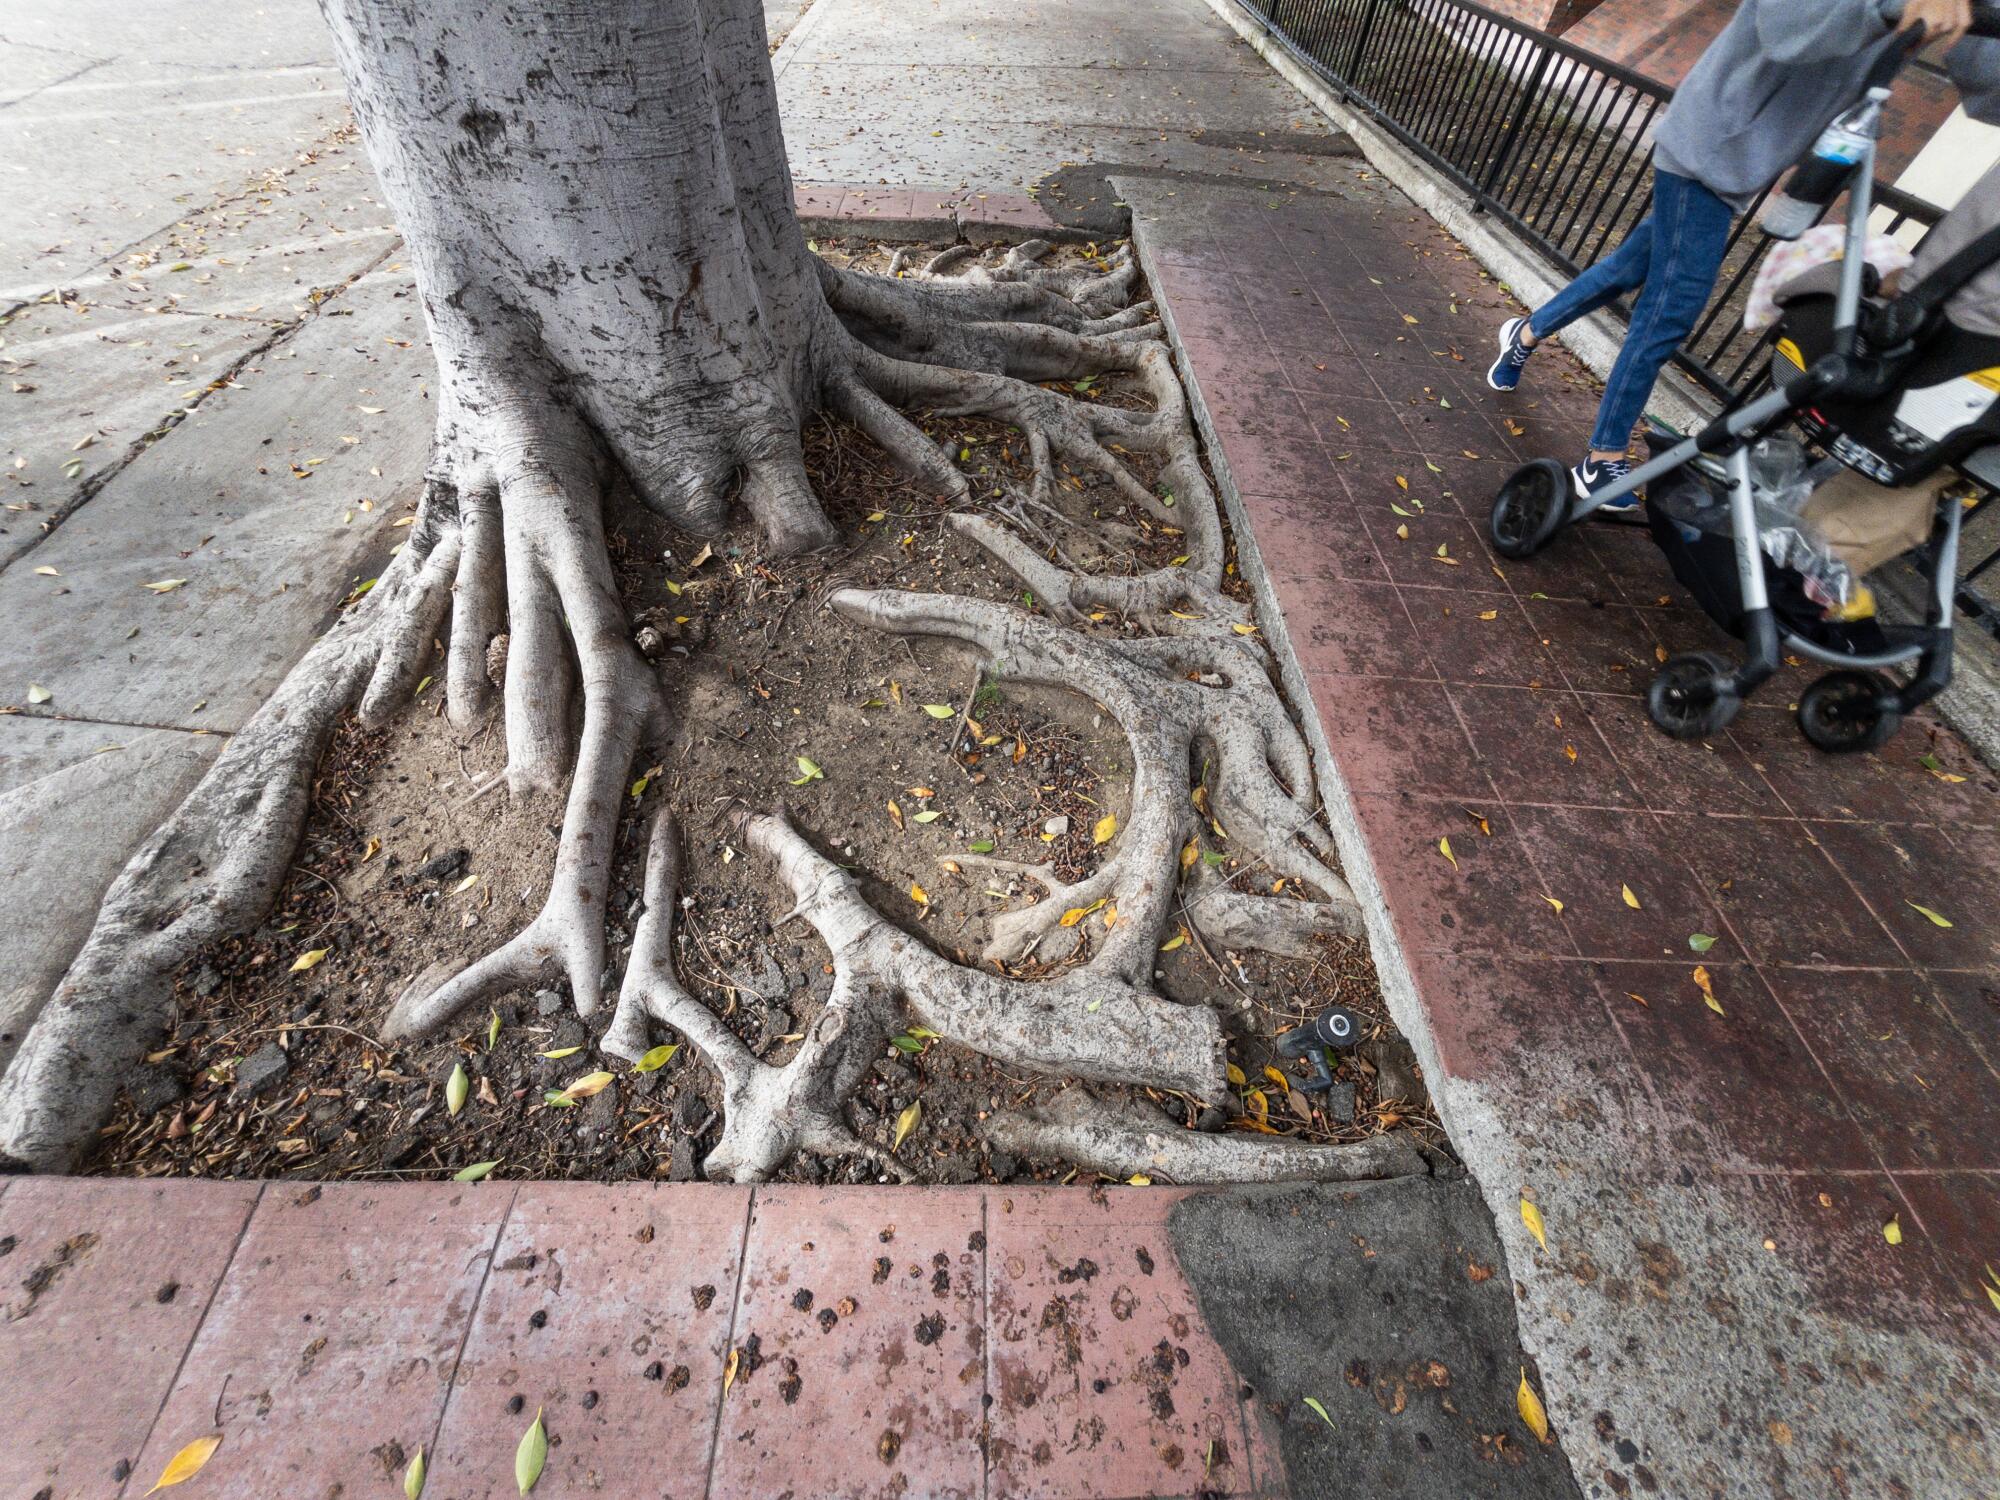 Under a tree with roots visible on the sidewalk.